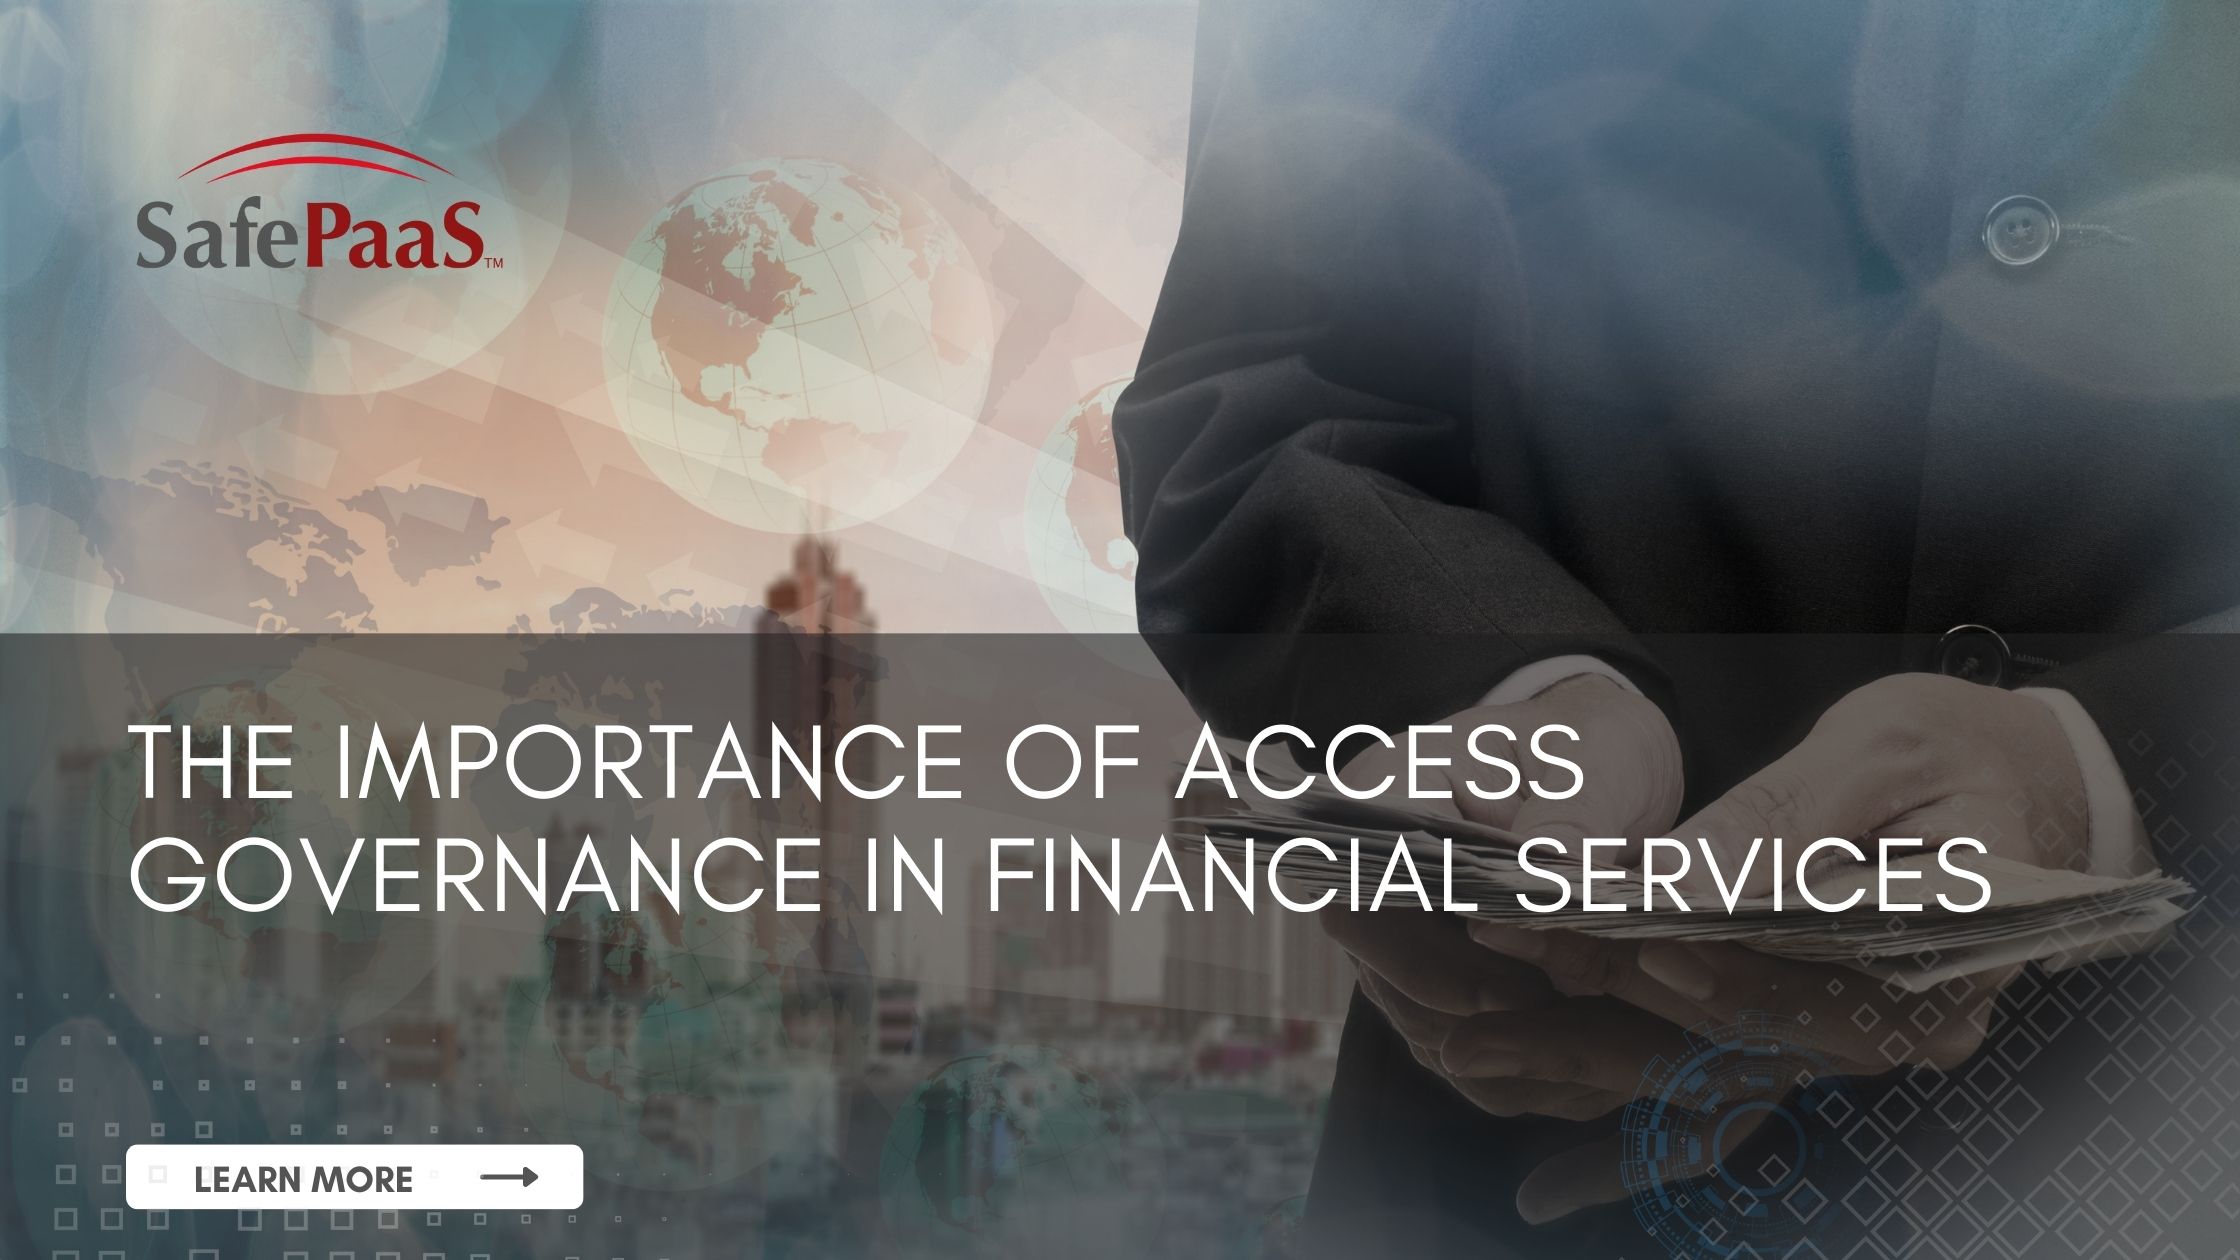 Access Governance for Financial Services